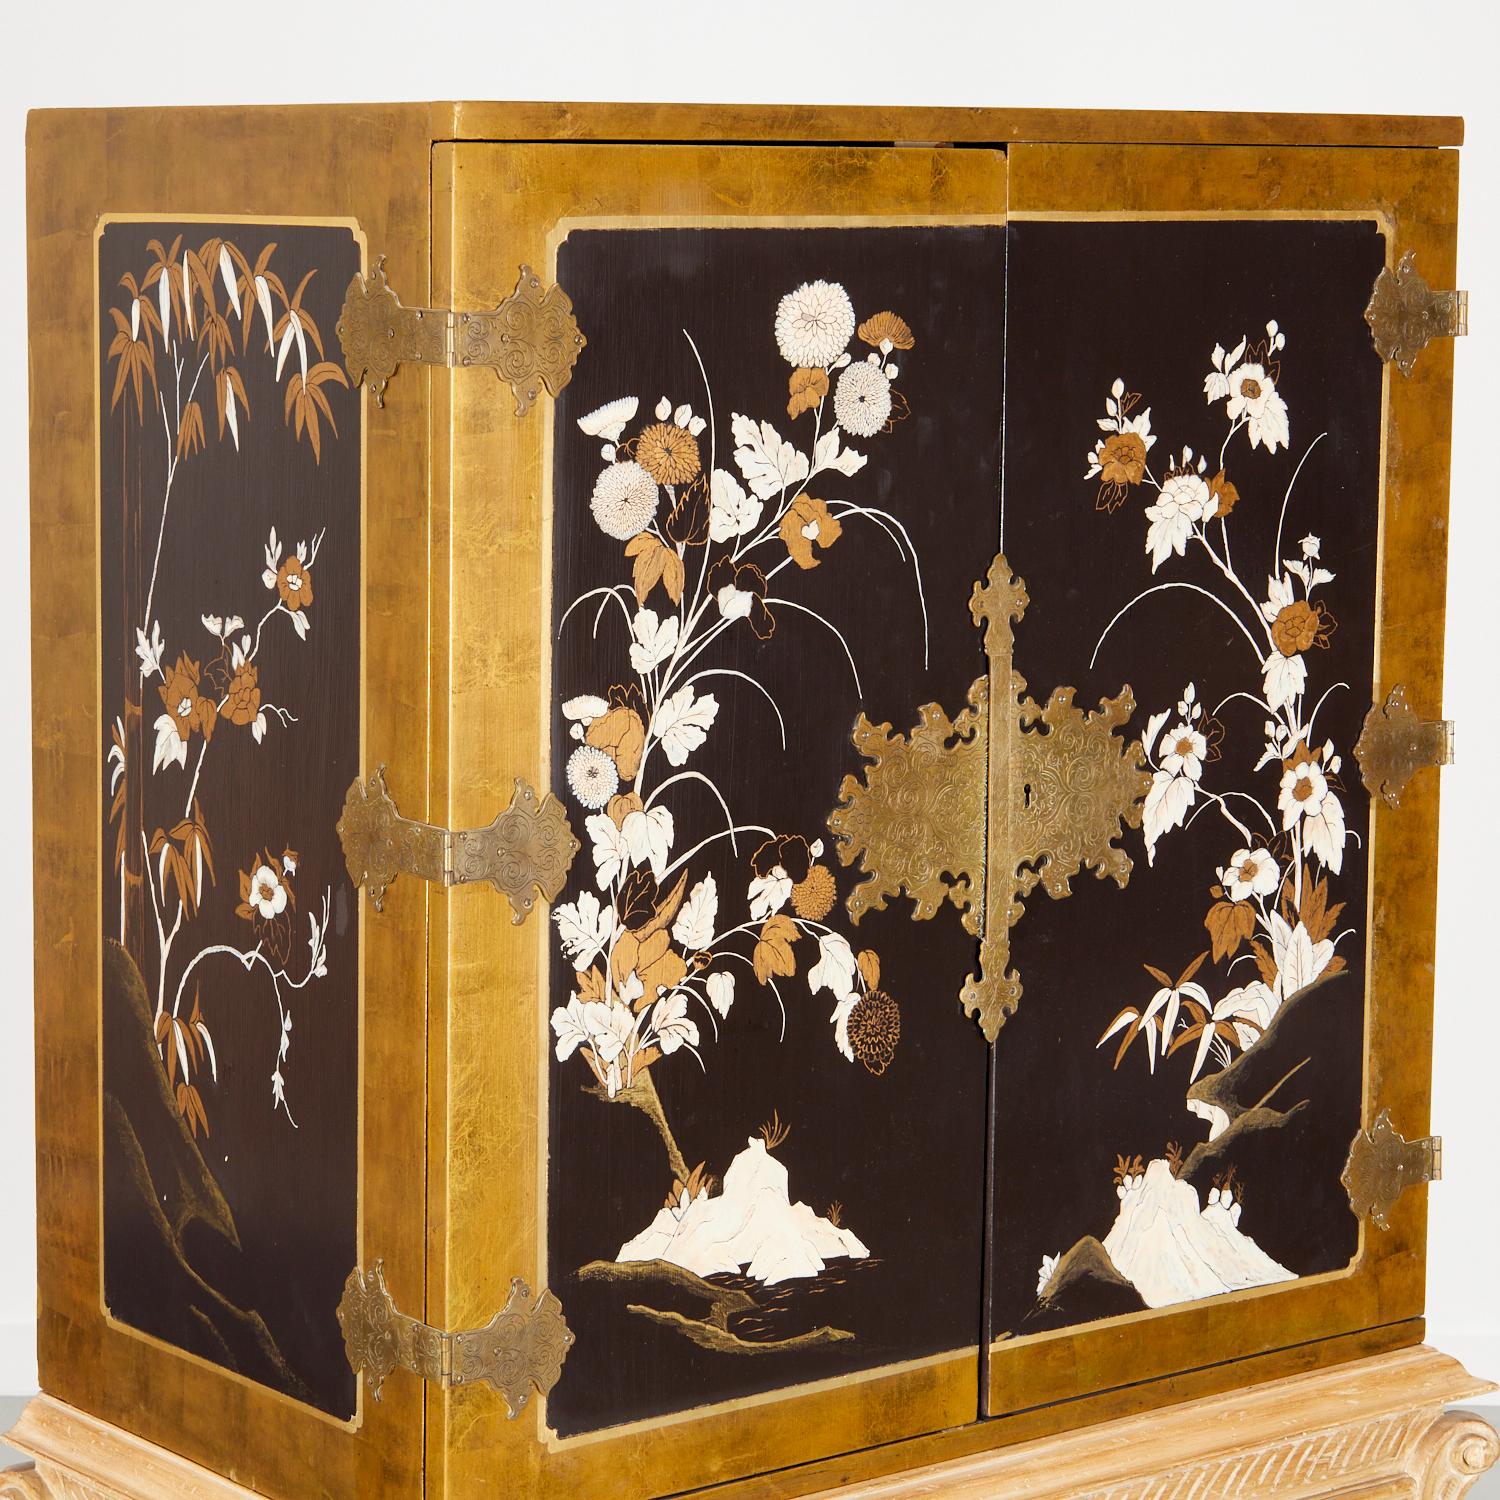 An unusual and striking statement piece, vintage 20th century, Chinoiserie engraved brass mounted lacquer cupboard on a shell-carved stand with cabriole legs, unmarked. The front and sides of the cabinet are decorated with delicate floral details